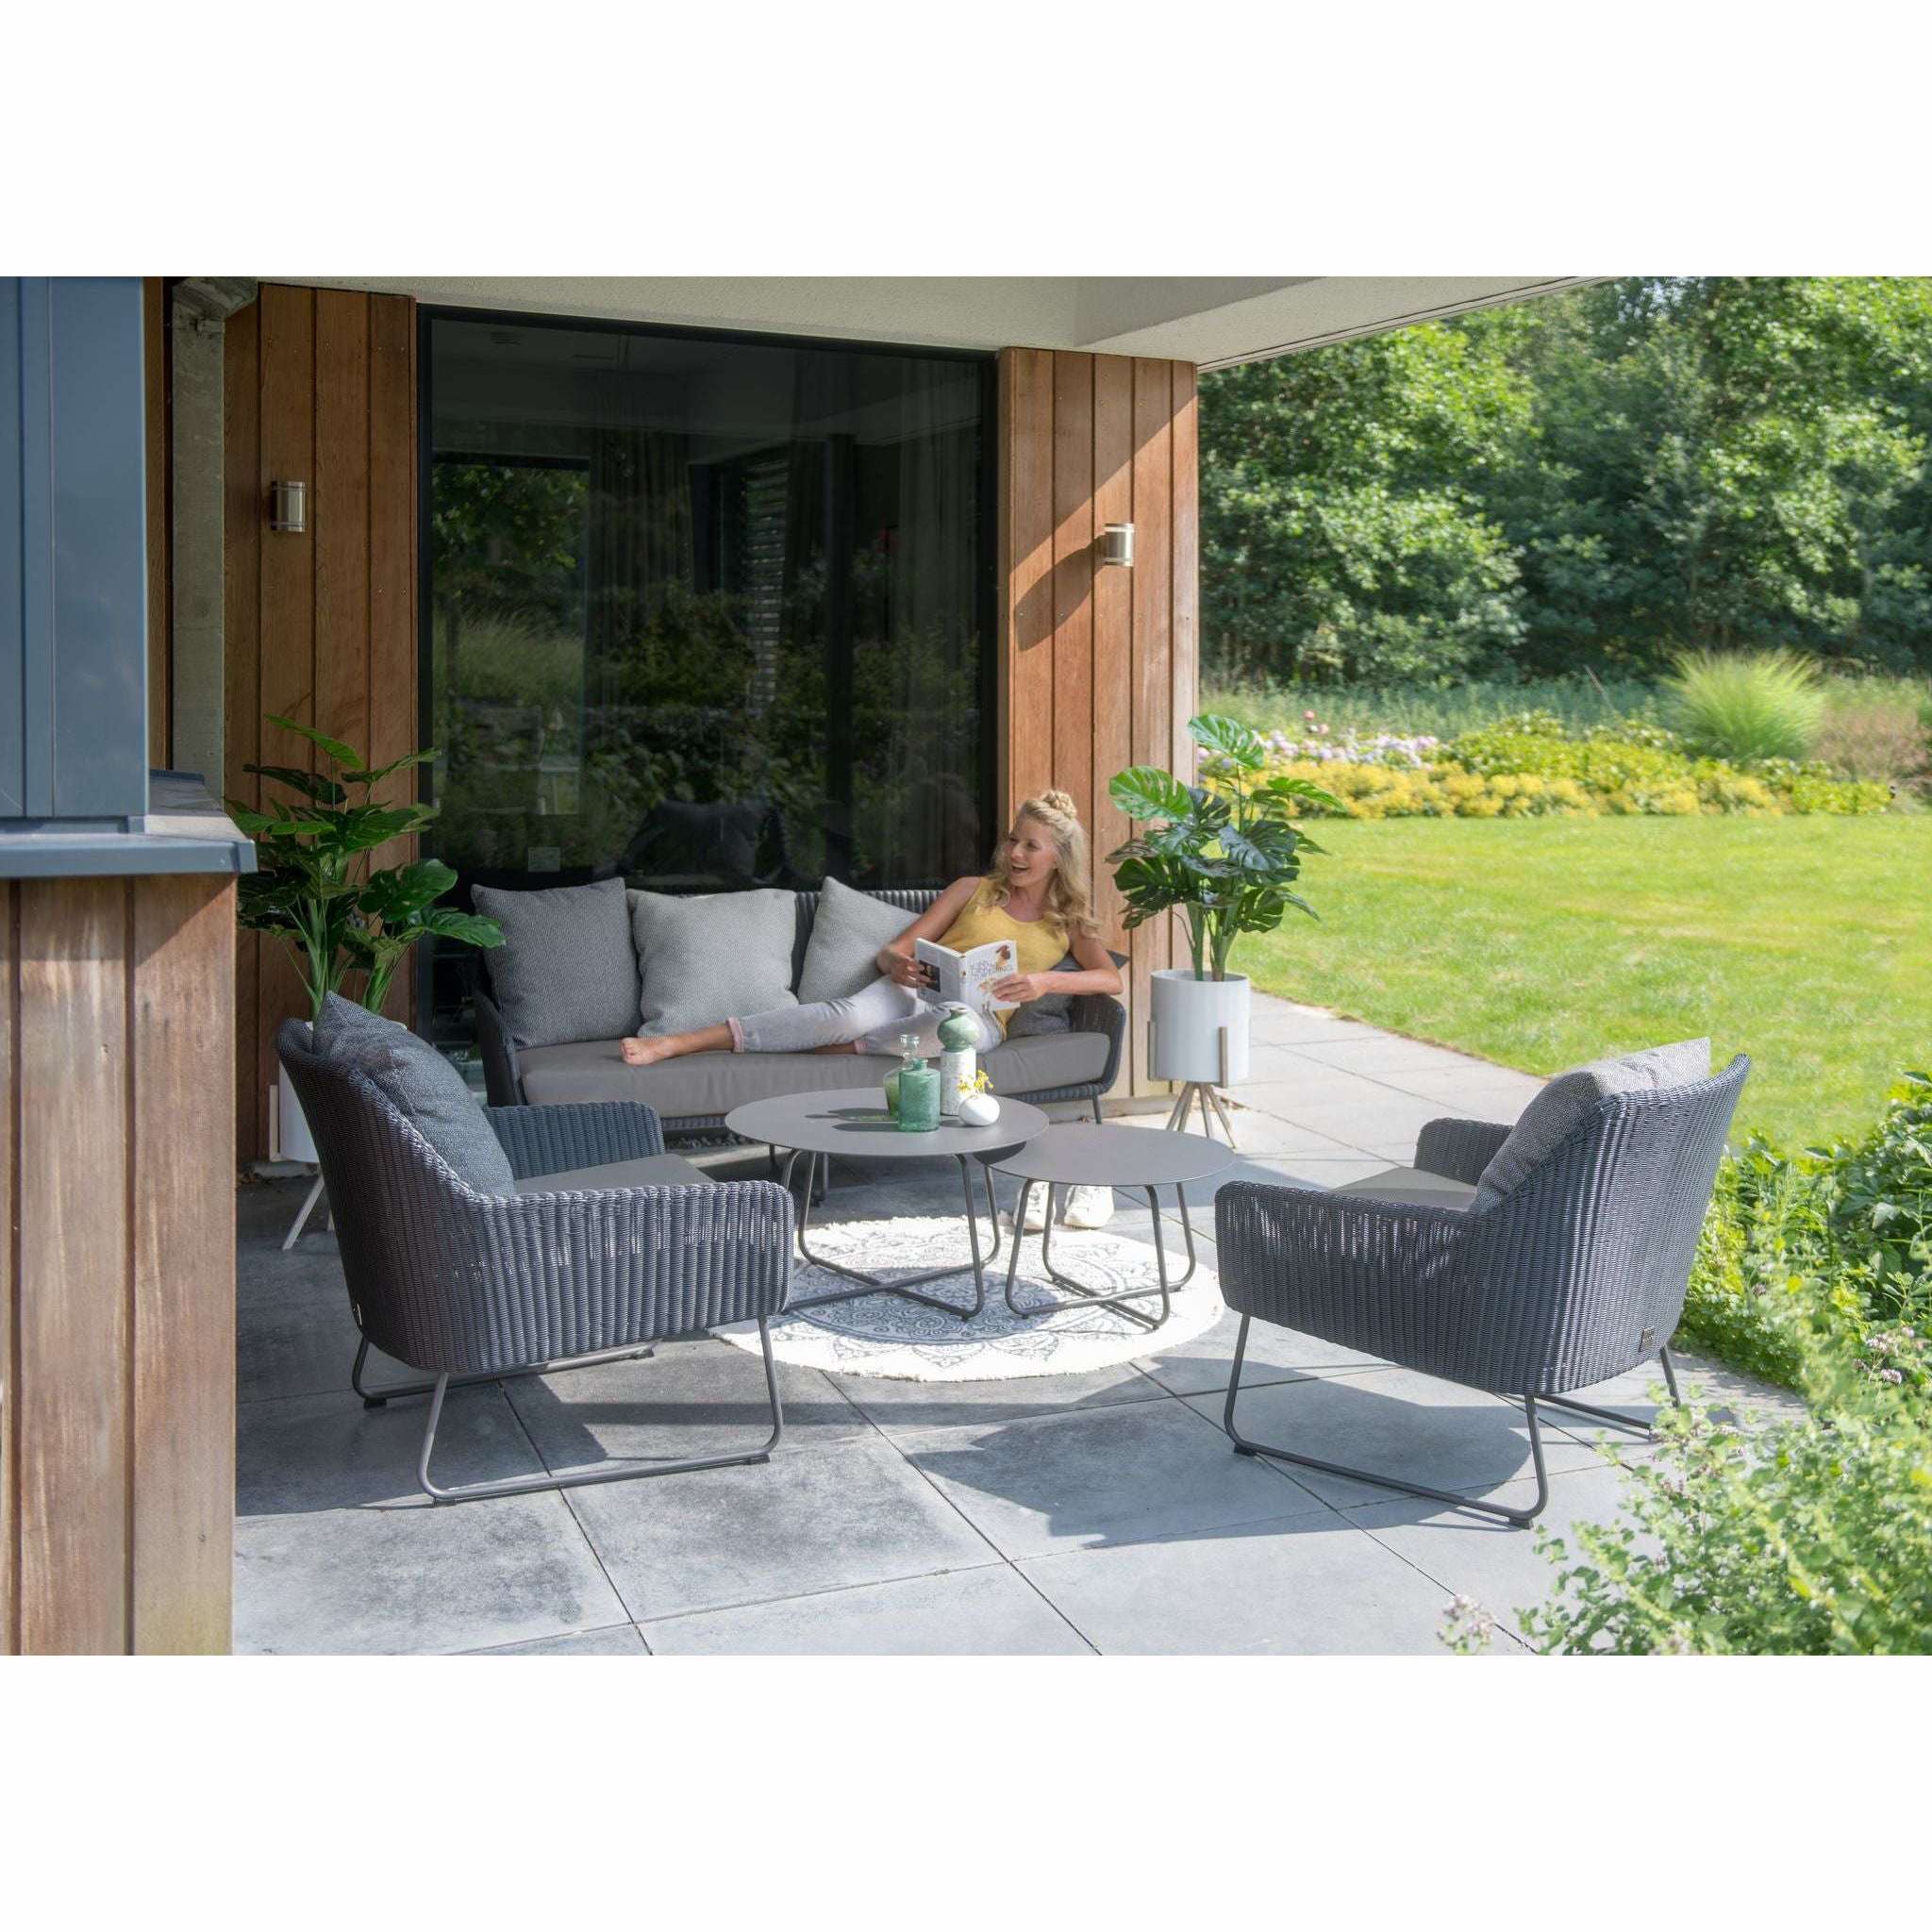 Exceptional Garden:4 Seasons Outdoor Avila Lounge Set with Dali Coffee Table